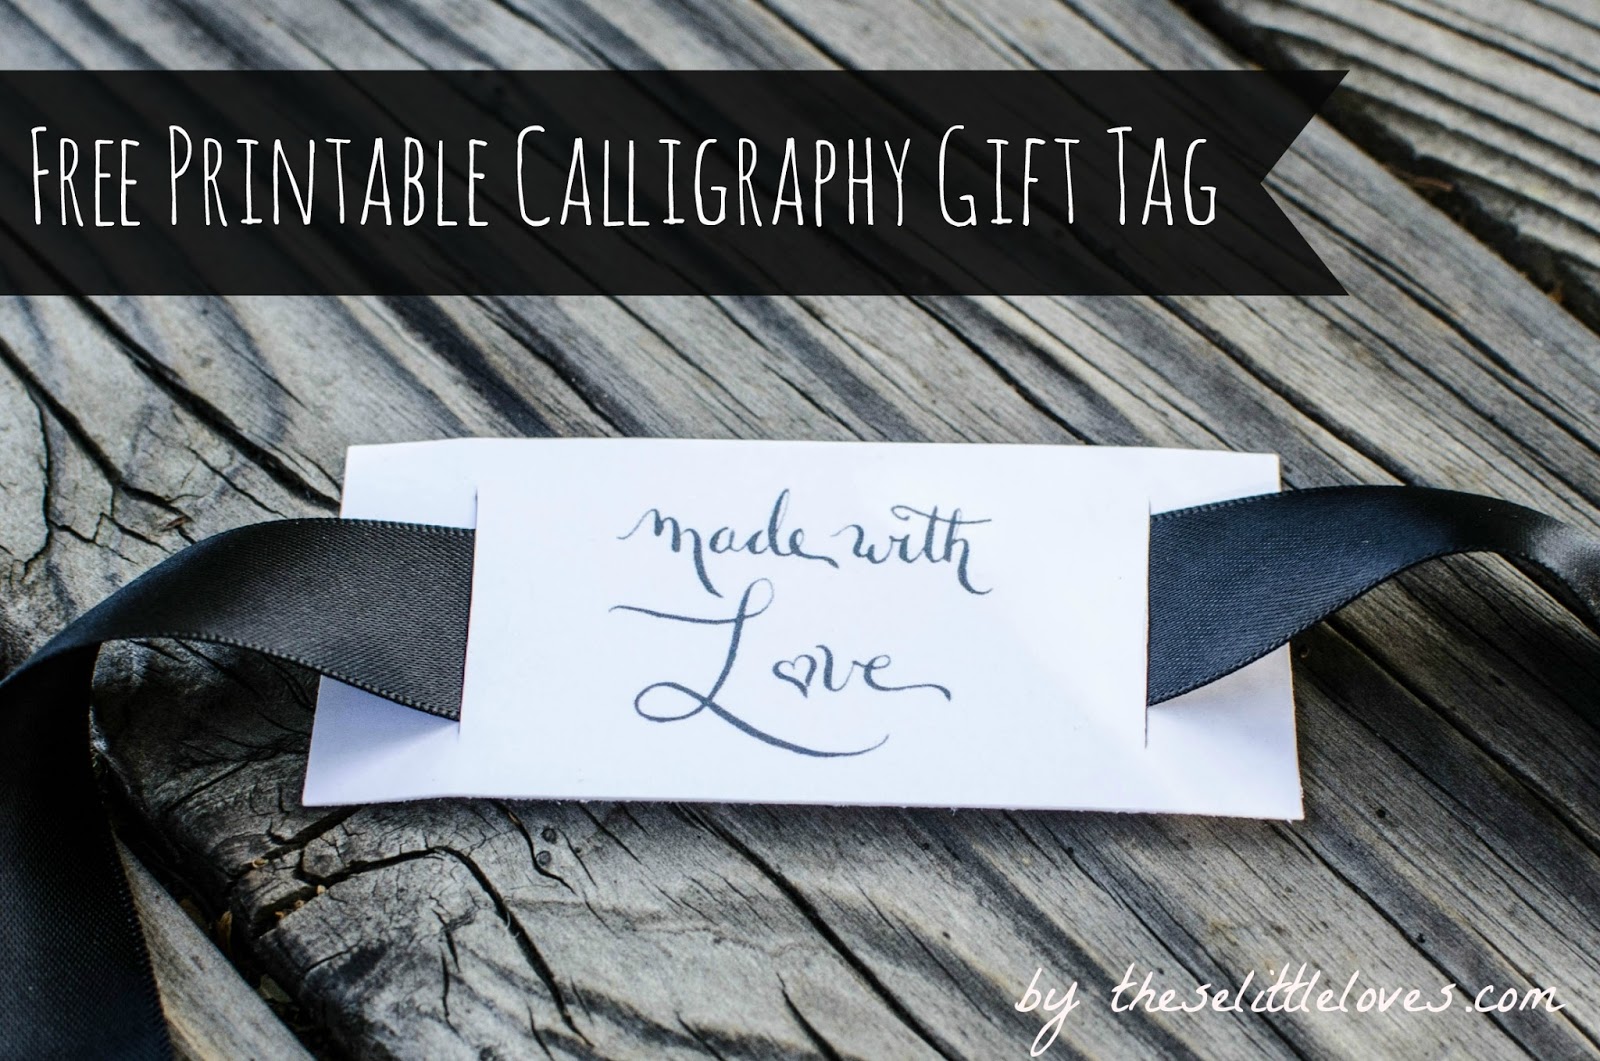 Made with Love | A Free Printable Calligraphy Gift Tag